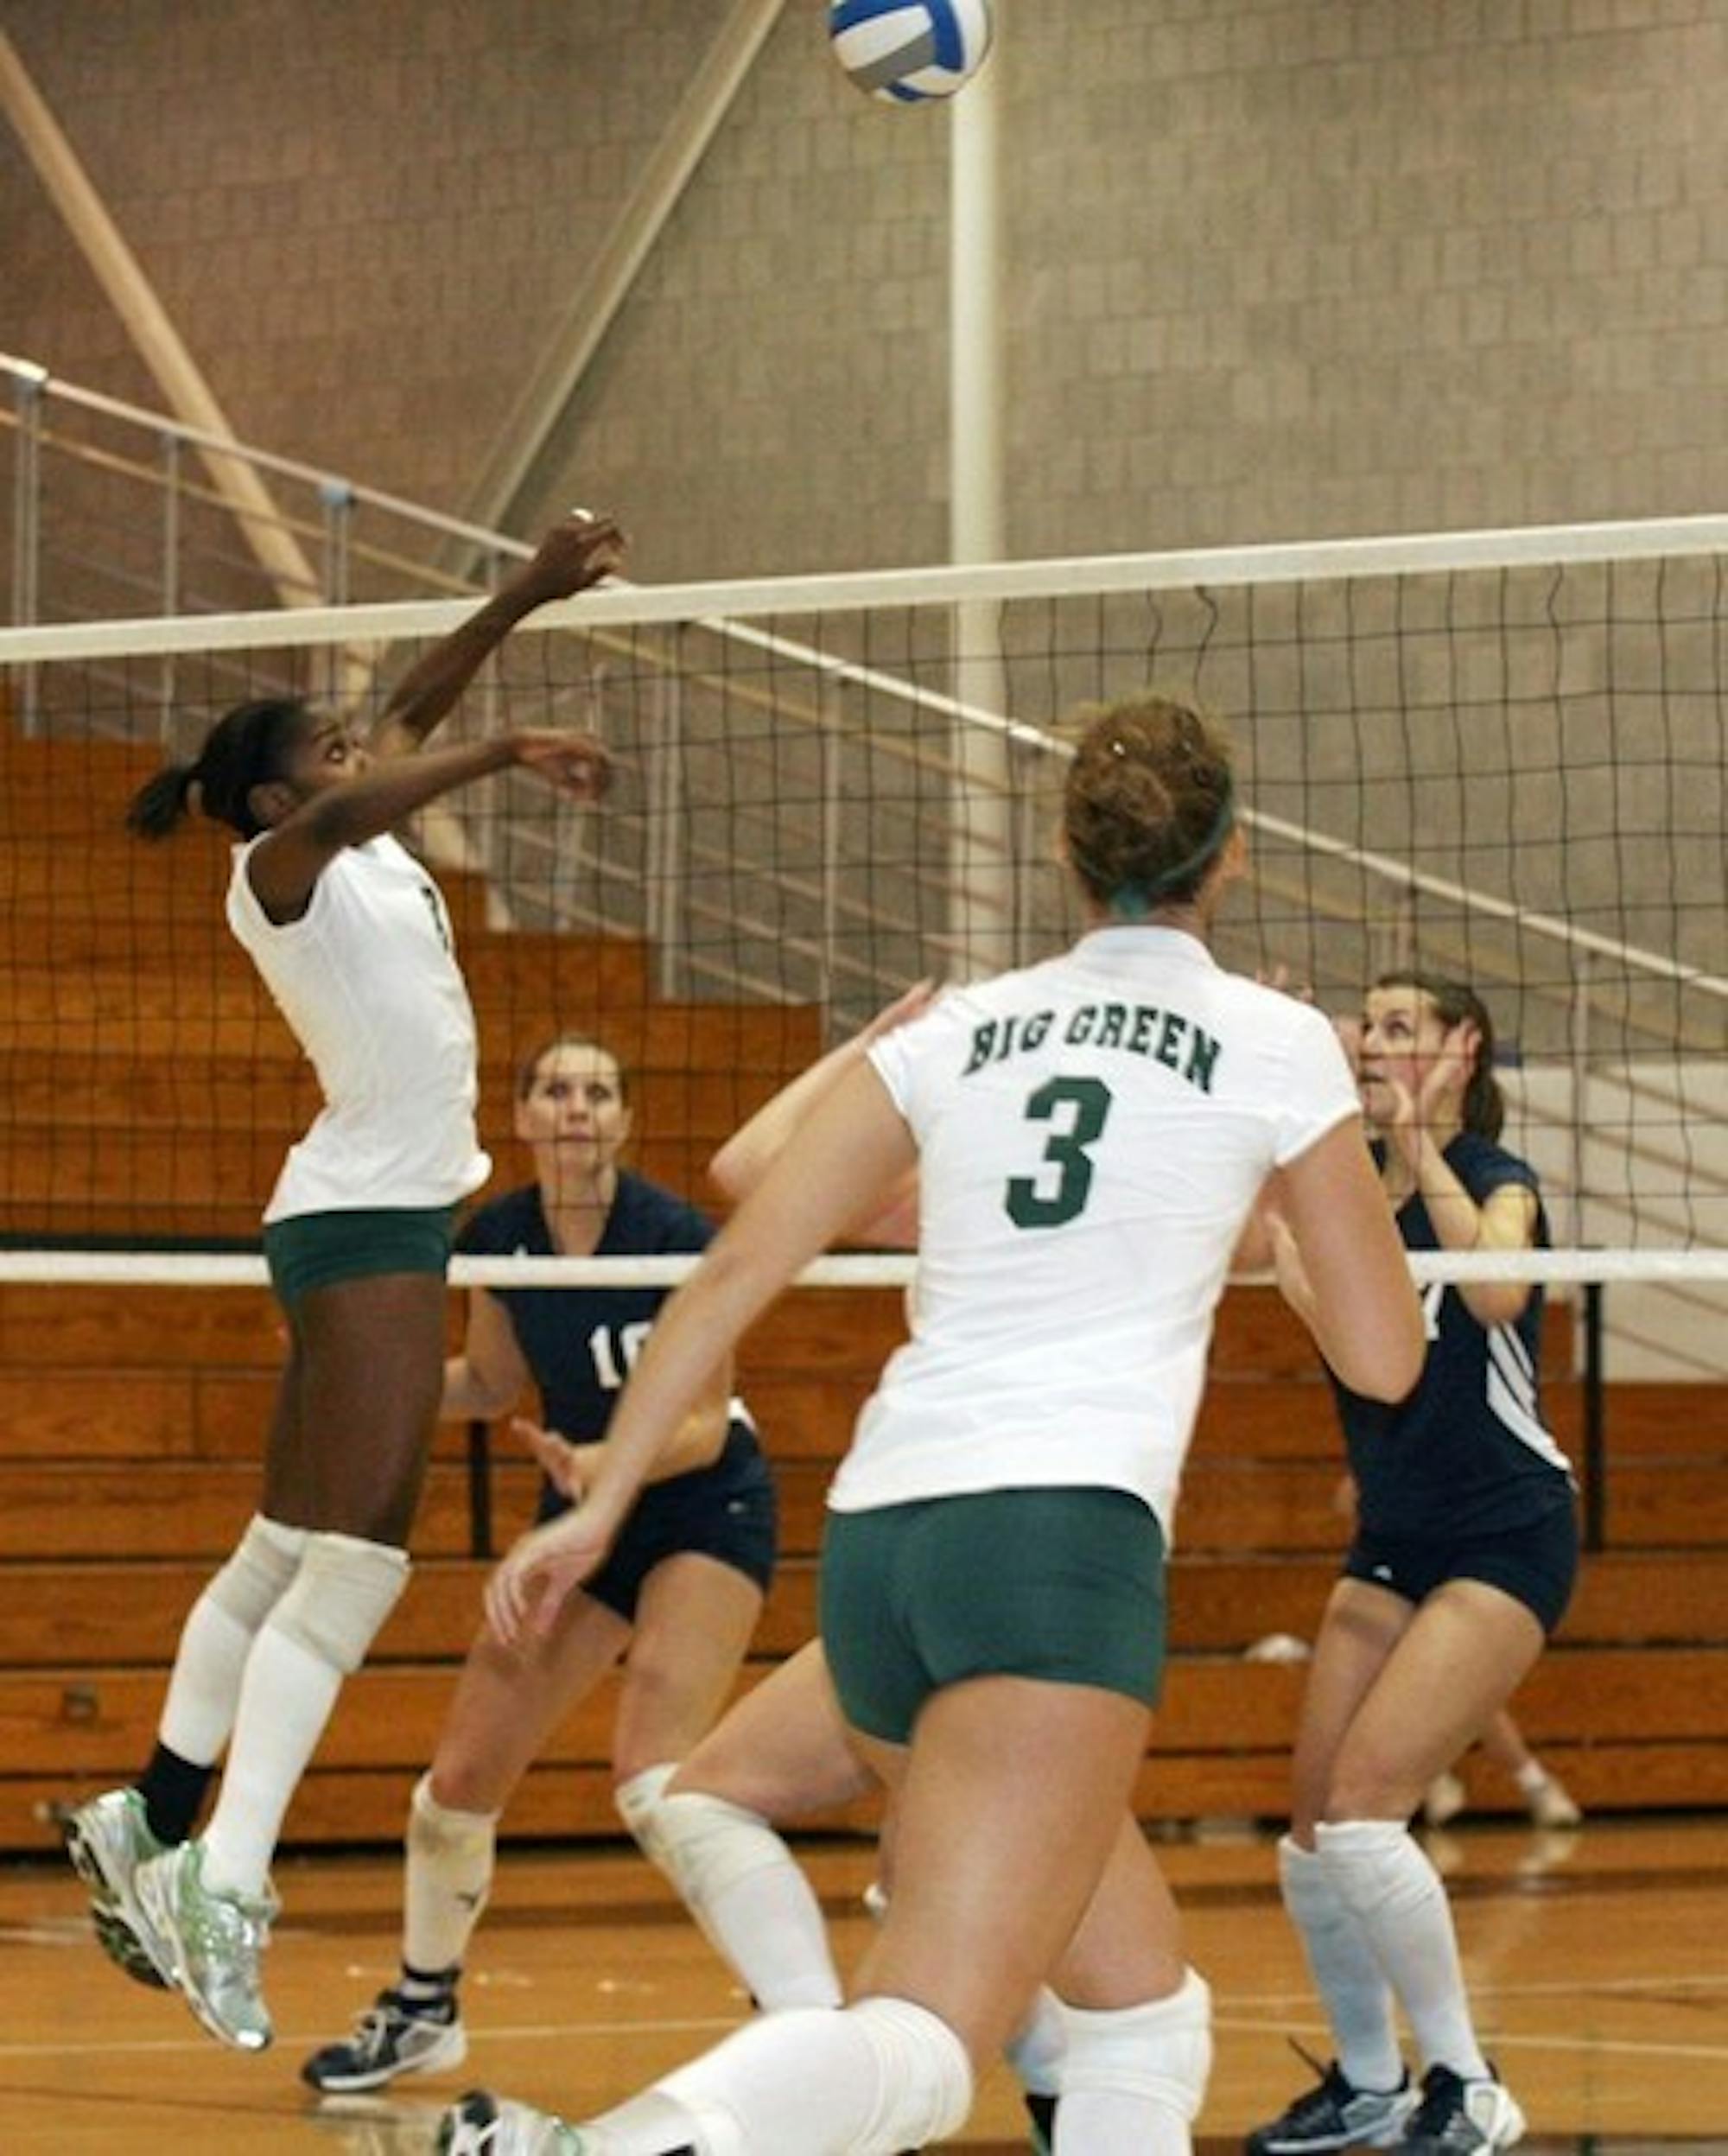 Middle blocker Nadine Parris '06 (left), Dartmouth's only graduating senior, will play her final two matches at Leede Arena next weekend.